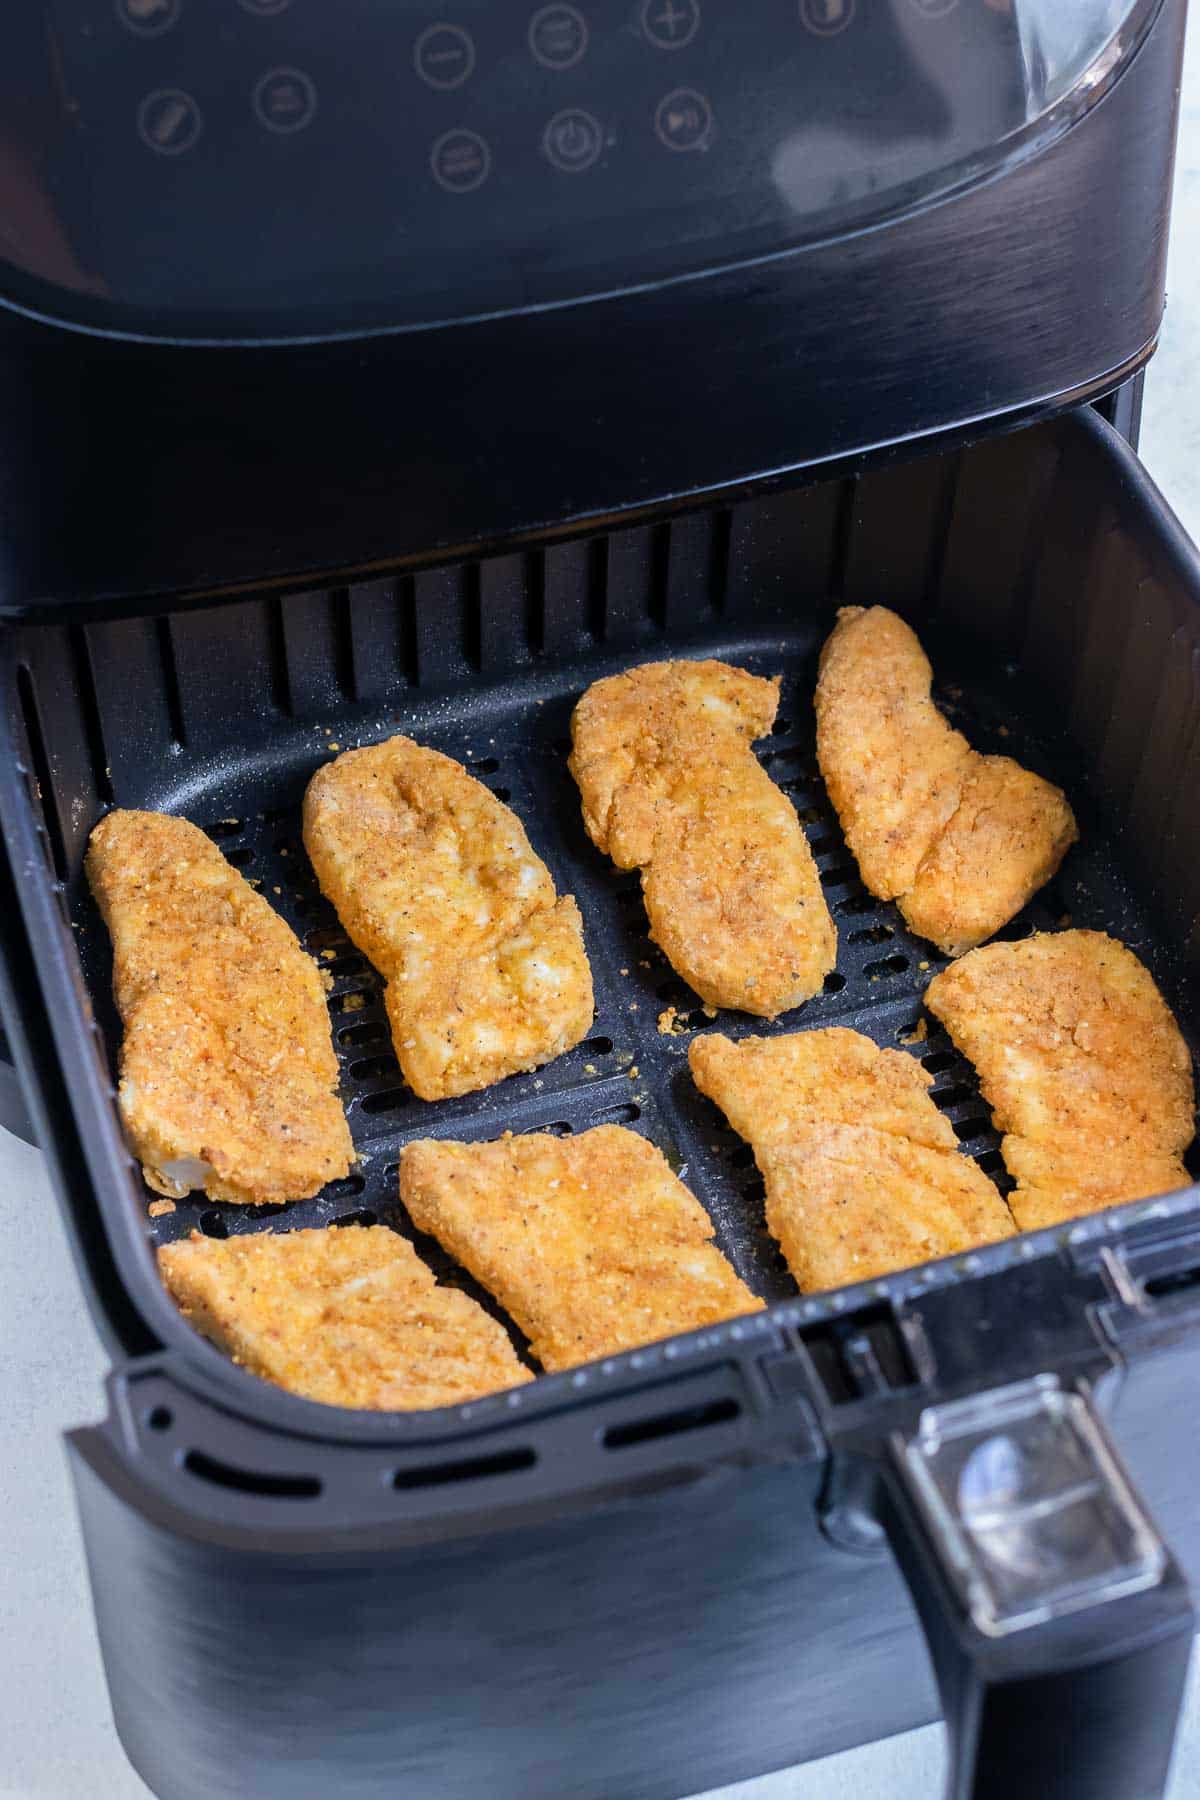 The fish is cooked in the air fryer until crispy.